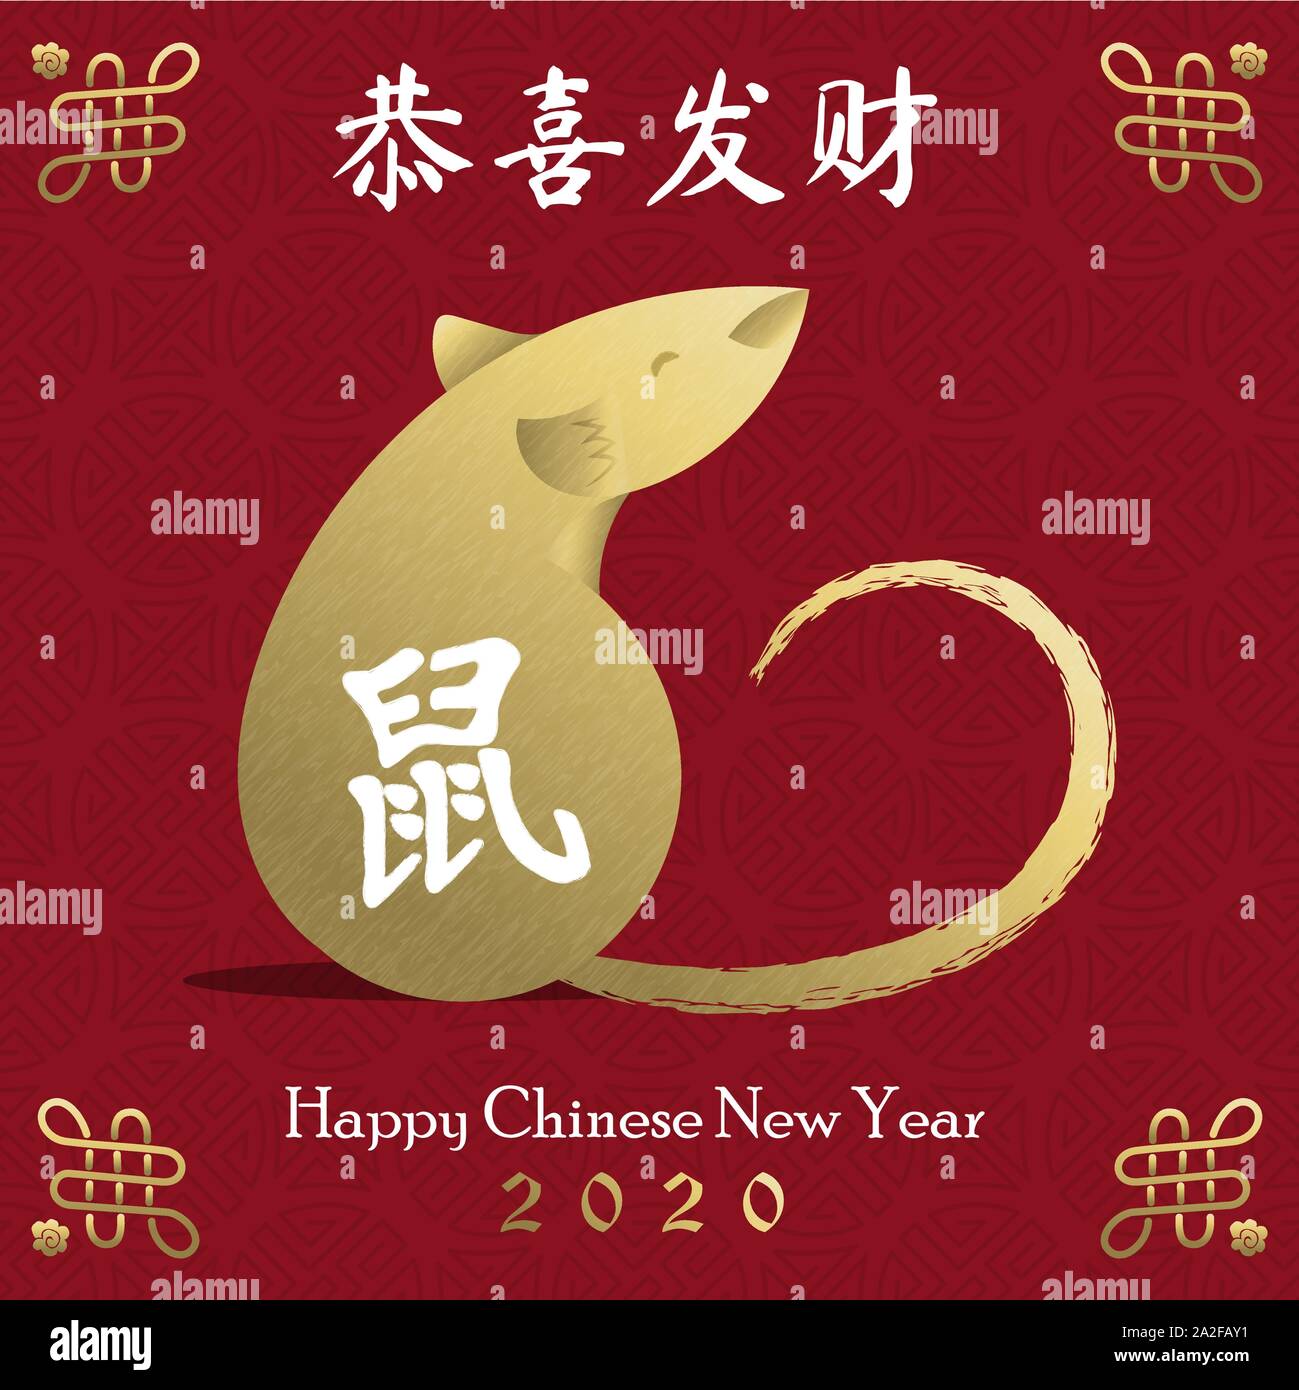 Chinese new year 2020 greeting card of gold mouse animal on red asian art background ...1299 x 1390